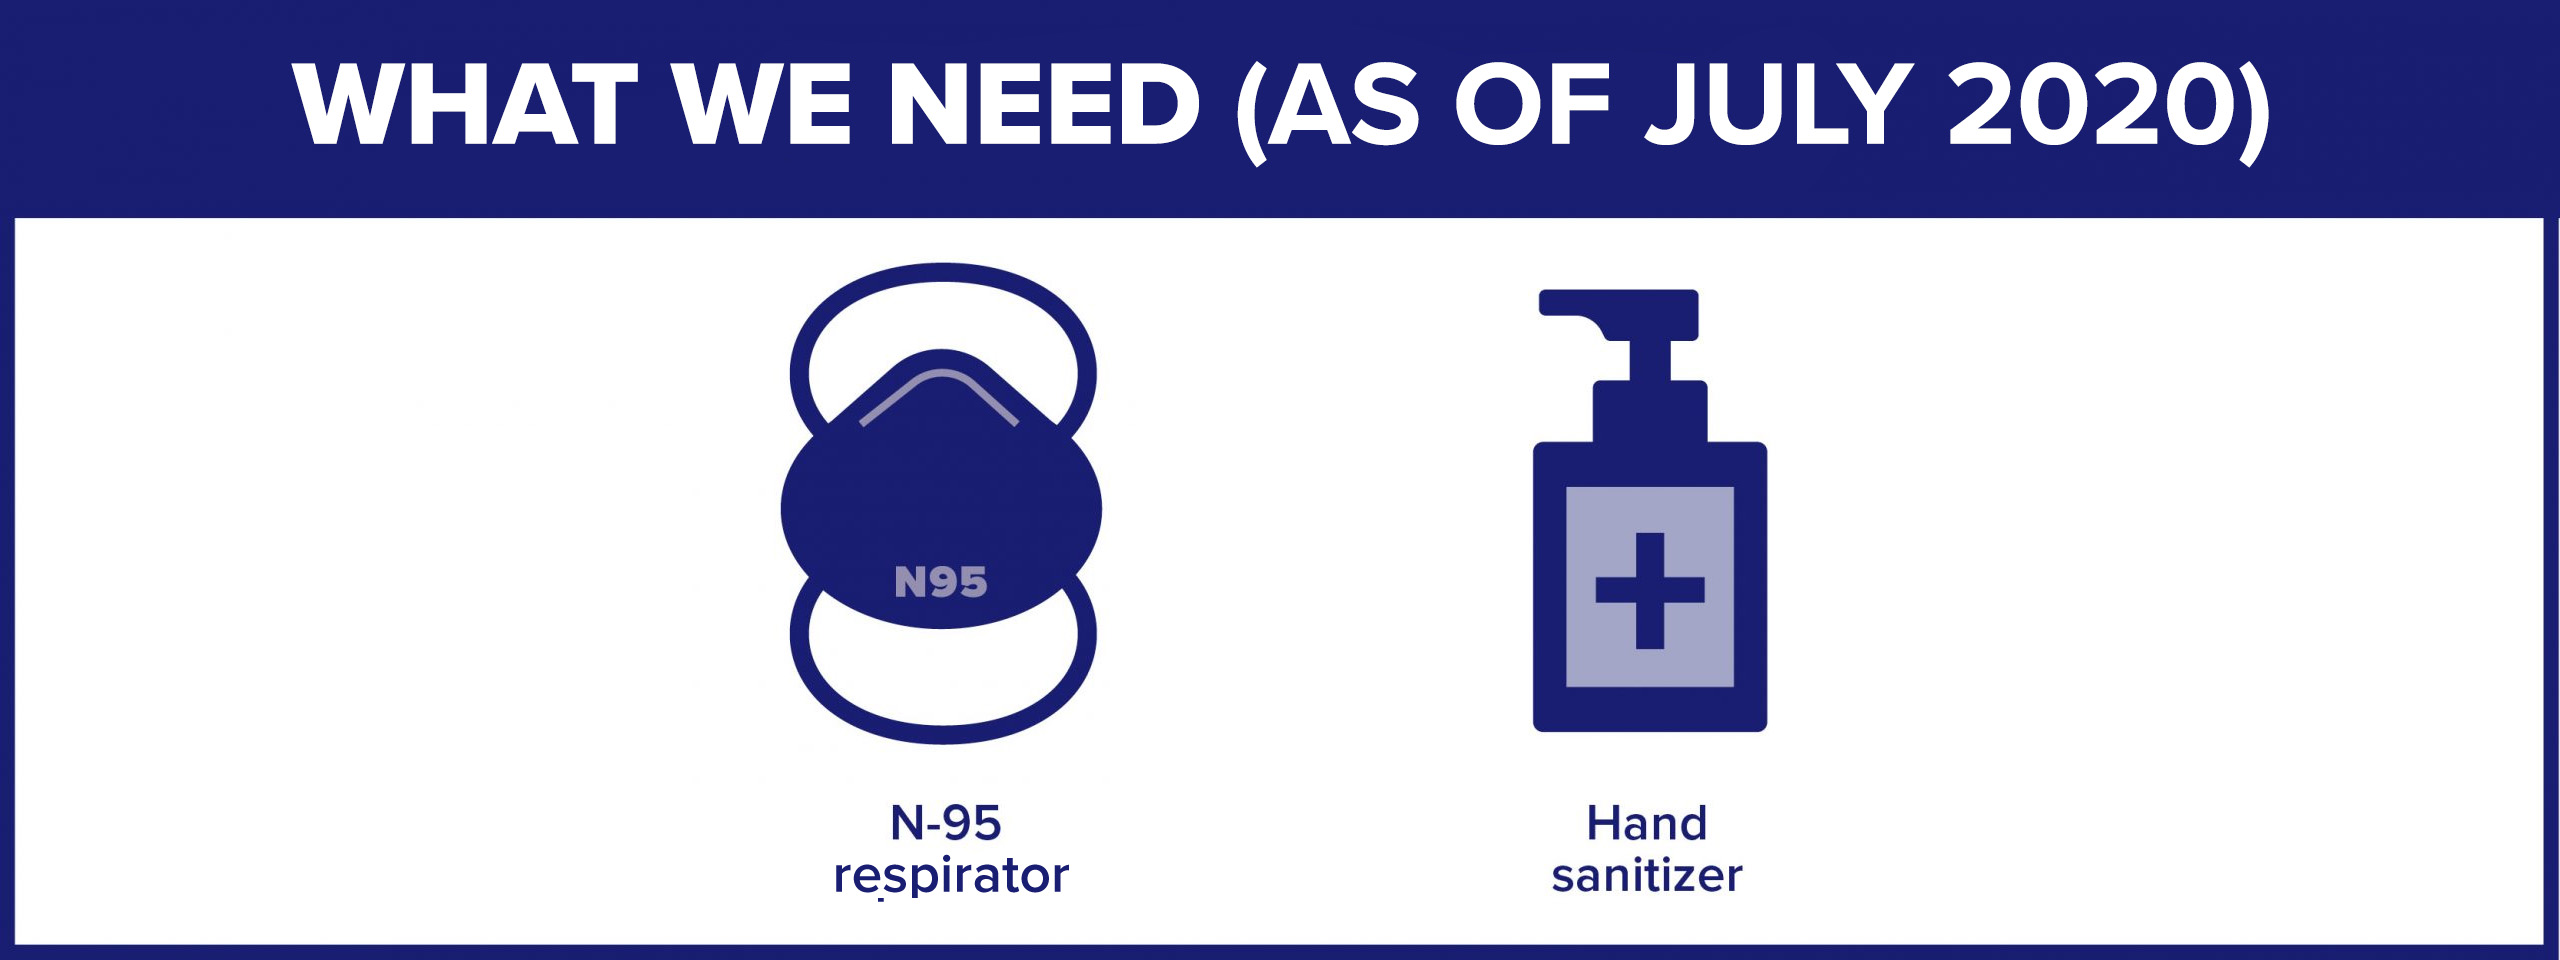 What we need (as of July 2020): N95 respirator and hand sanitizer